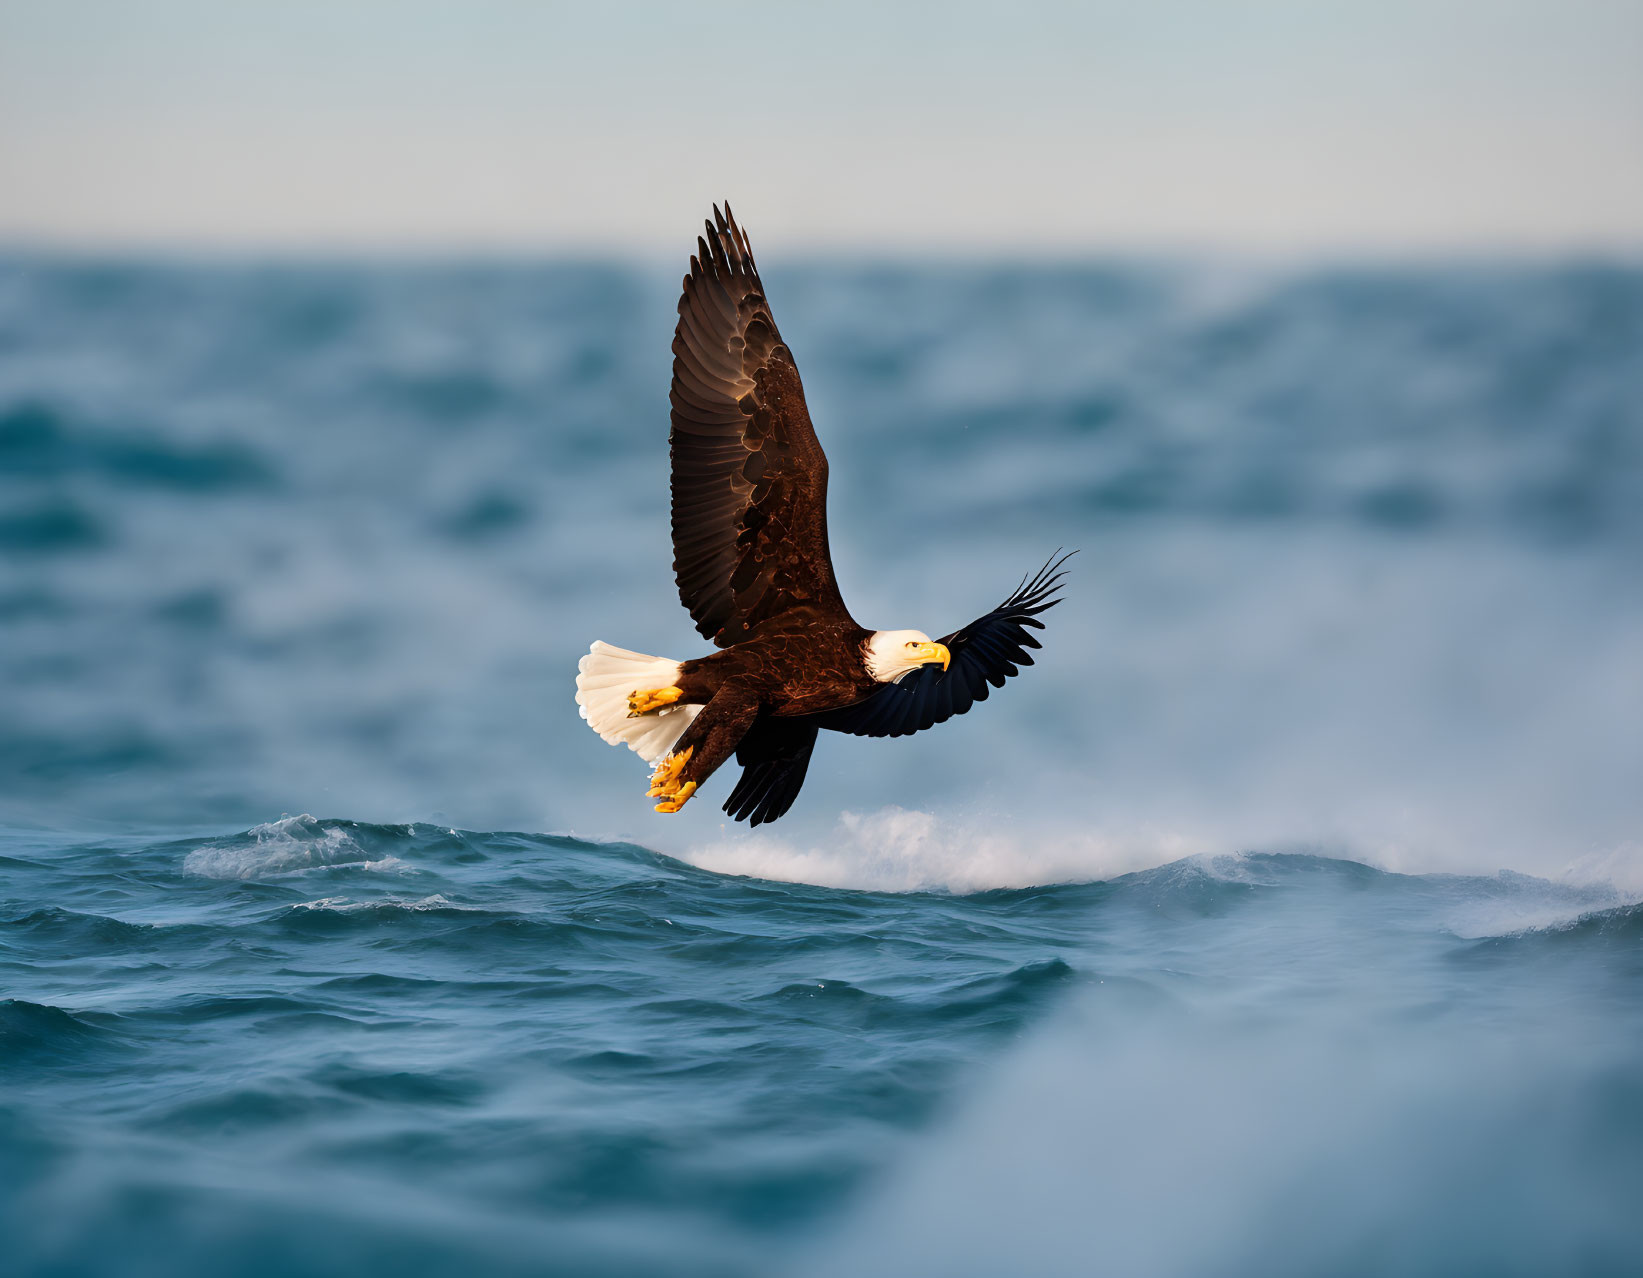 Graceful eagle flying low over wavy sea with spread wings.